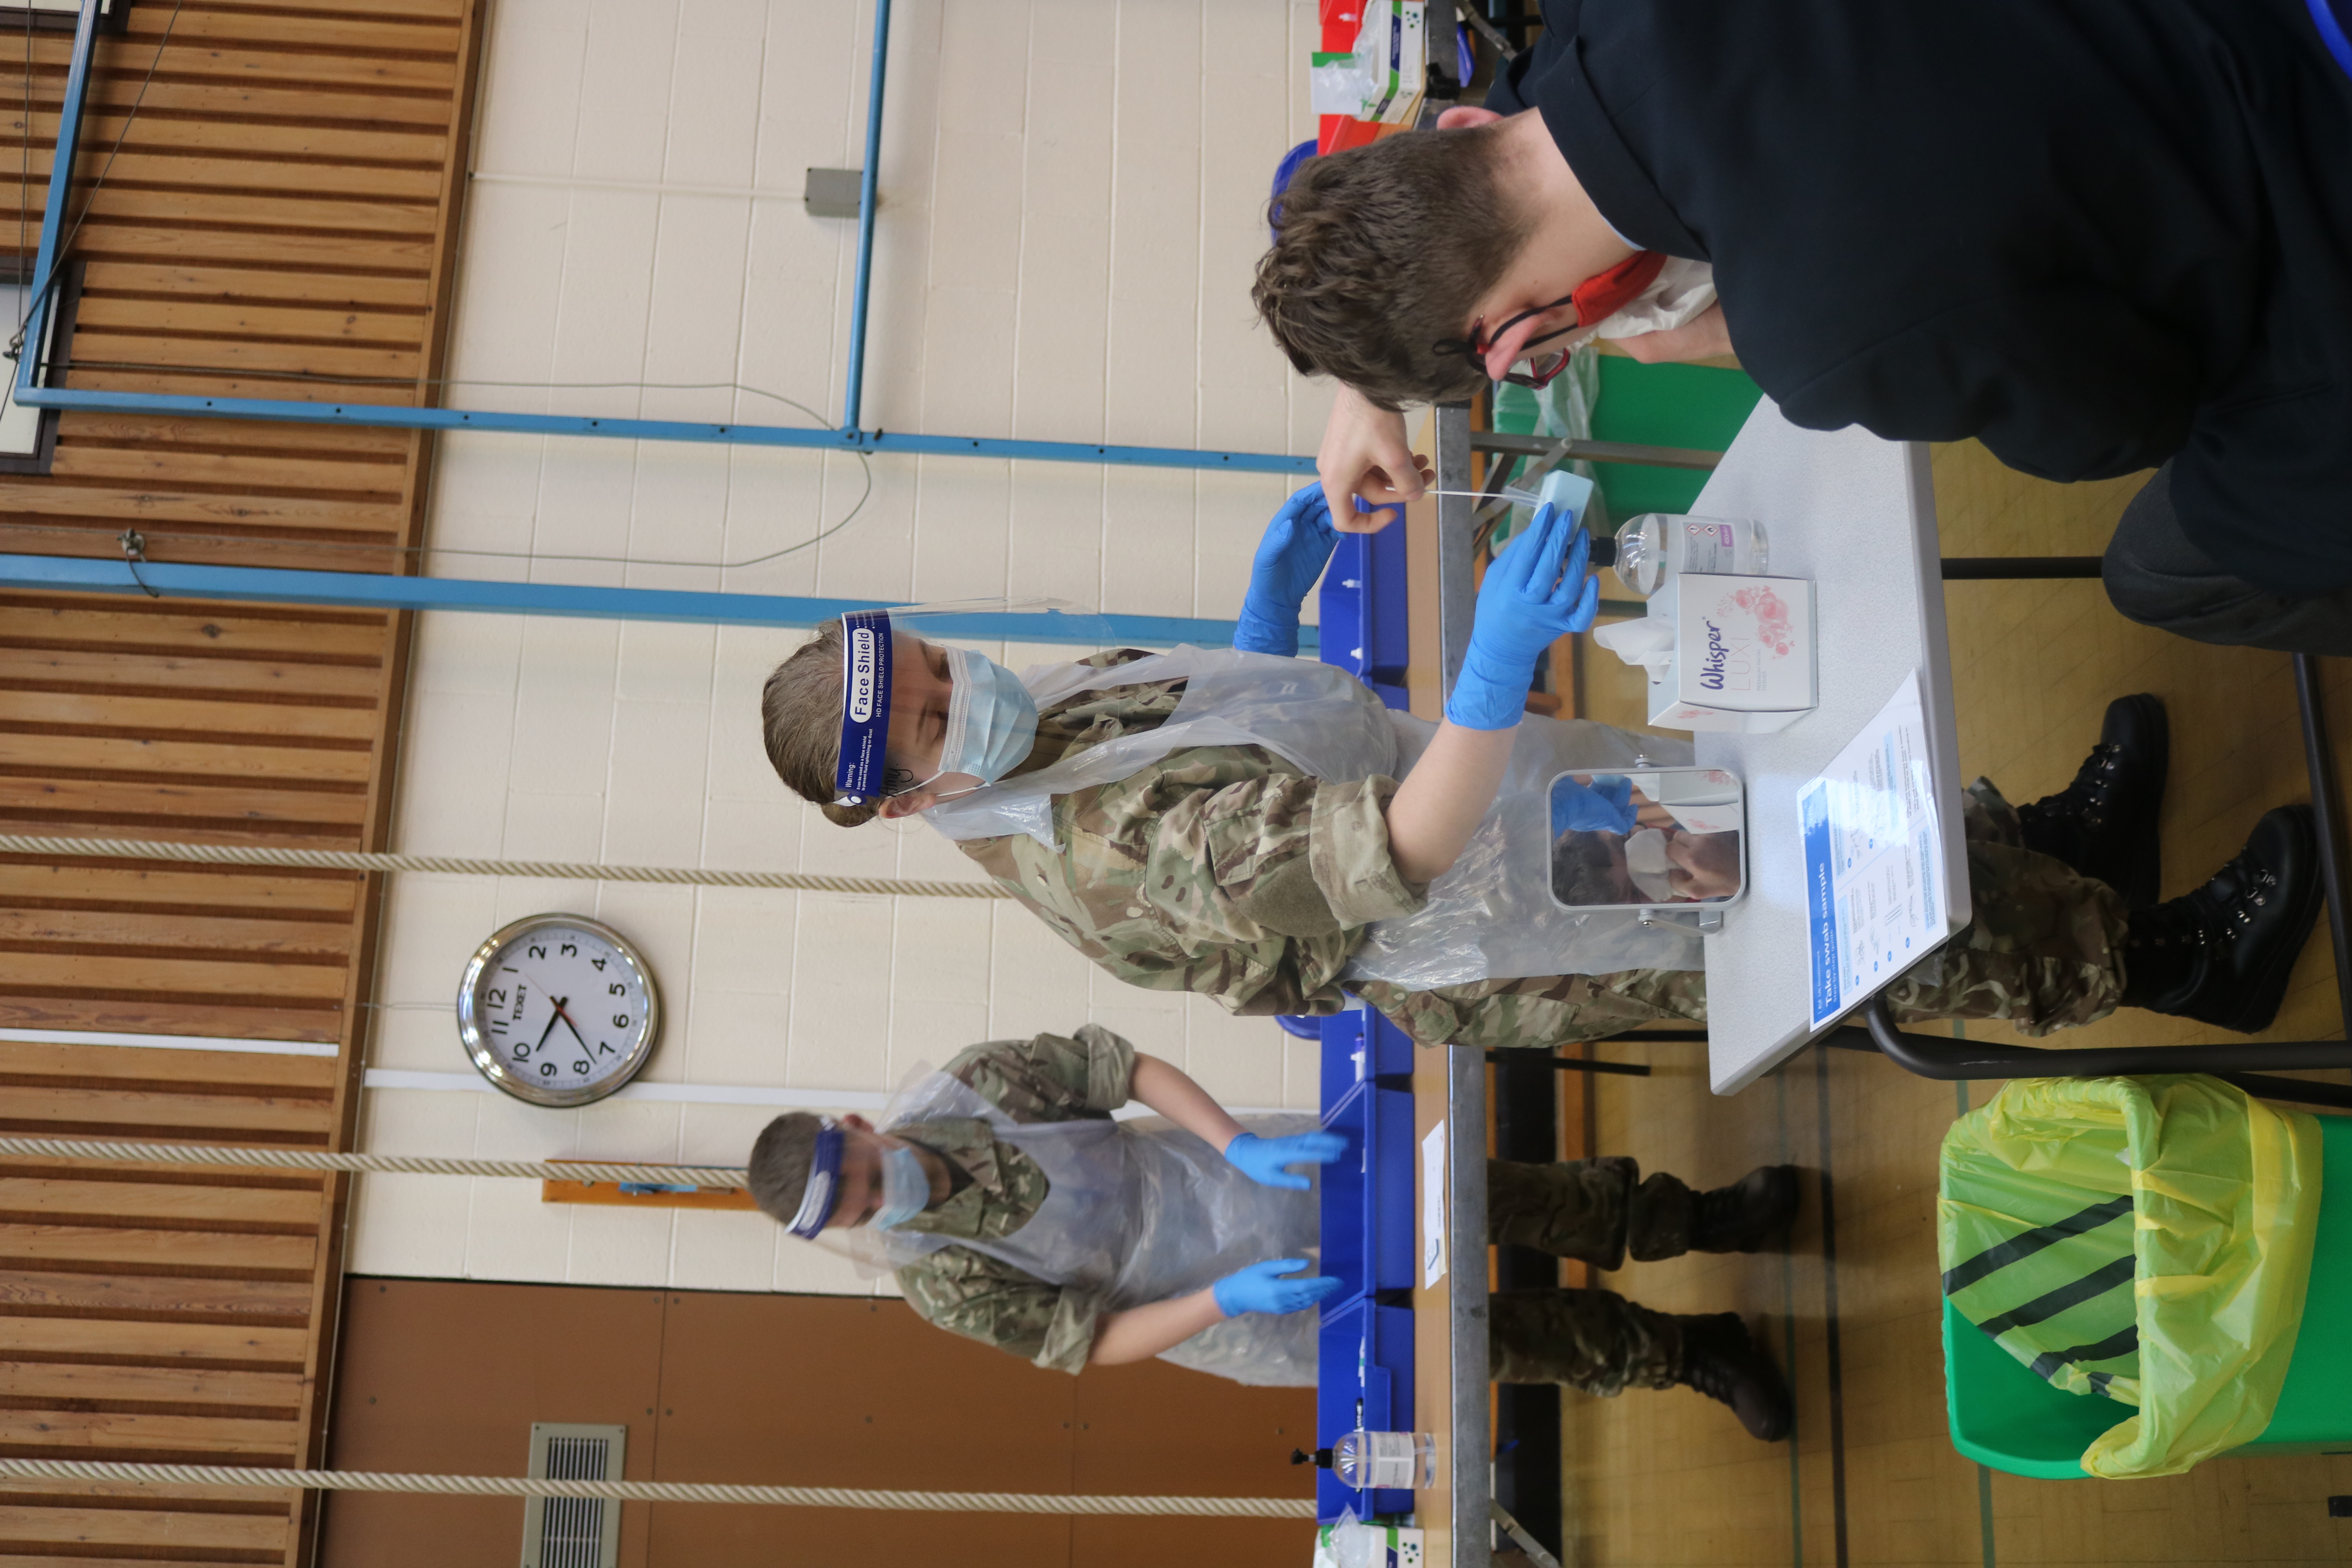 Cadets assisting with COVID PCR testing